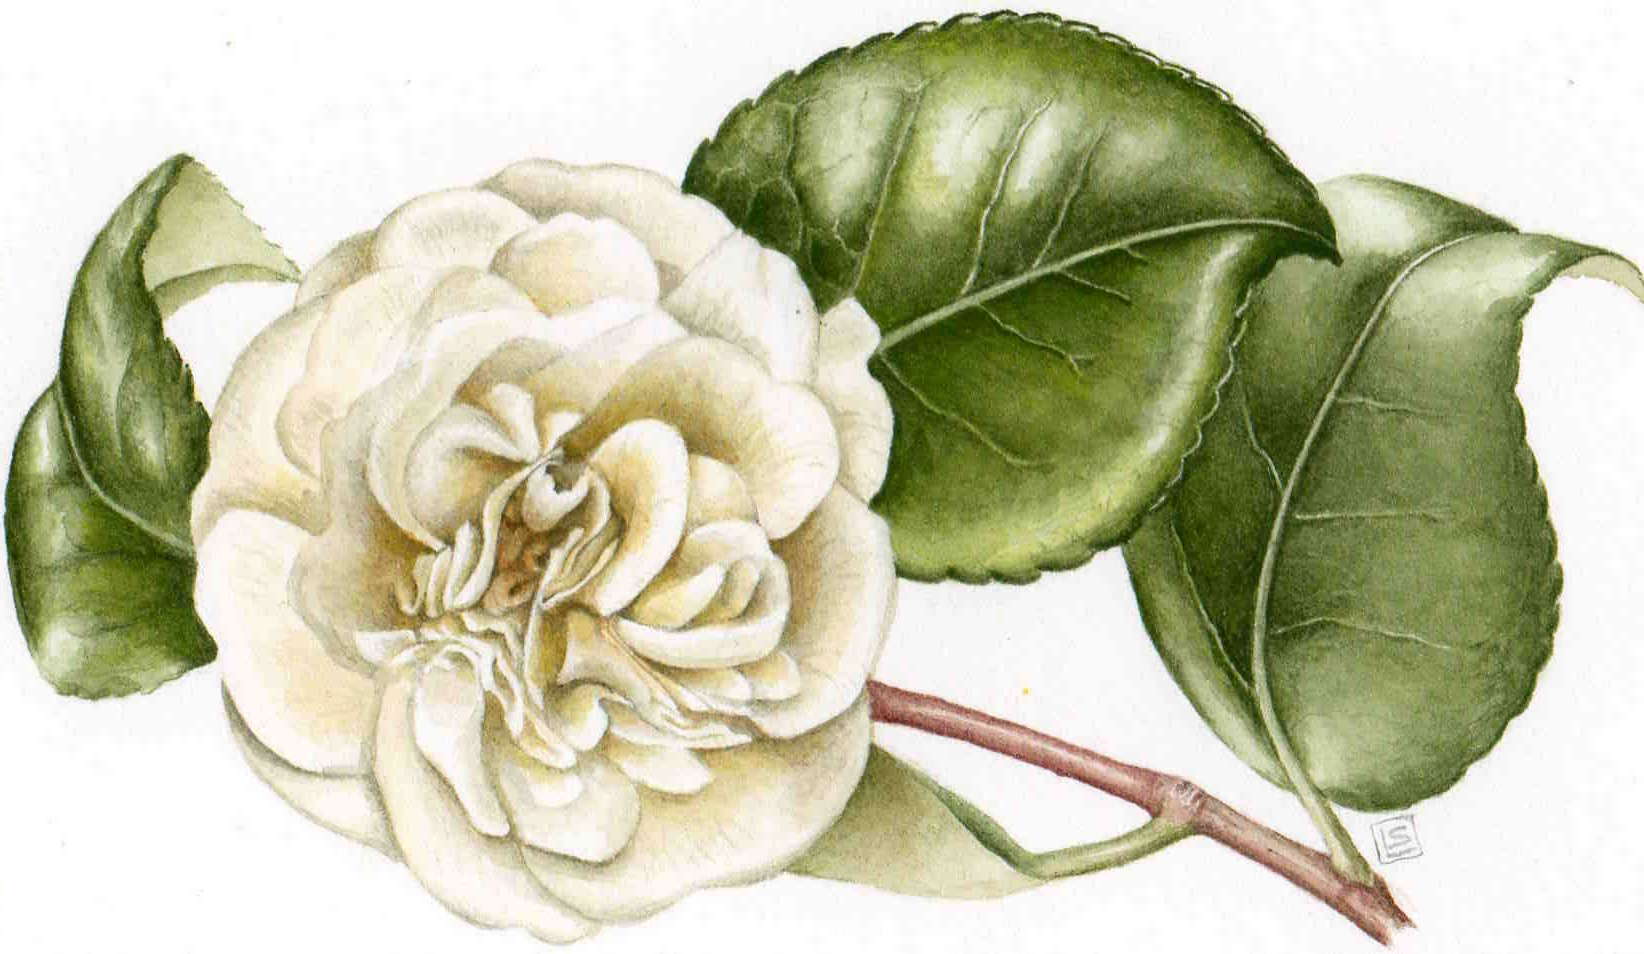 White camelia flower - watercolour painting.